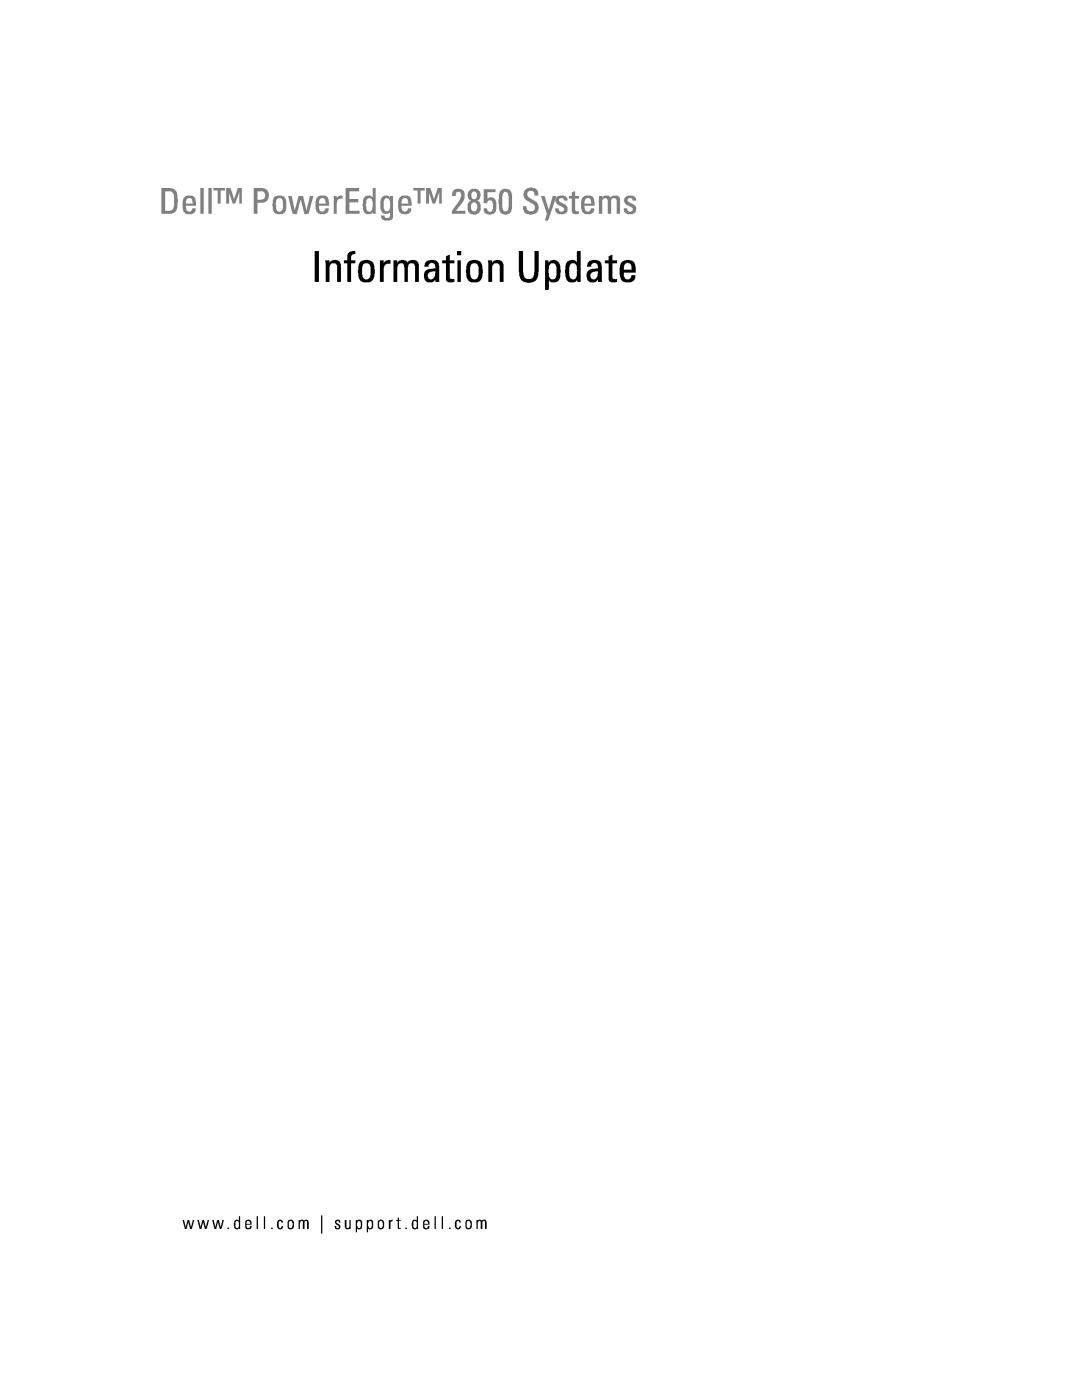 Dell manual Information Update, Dell PowerEdge 2850 Systems, w w w . d e l l . c o m s u p p o r t . d e l l . c o m 